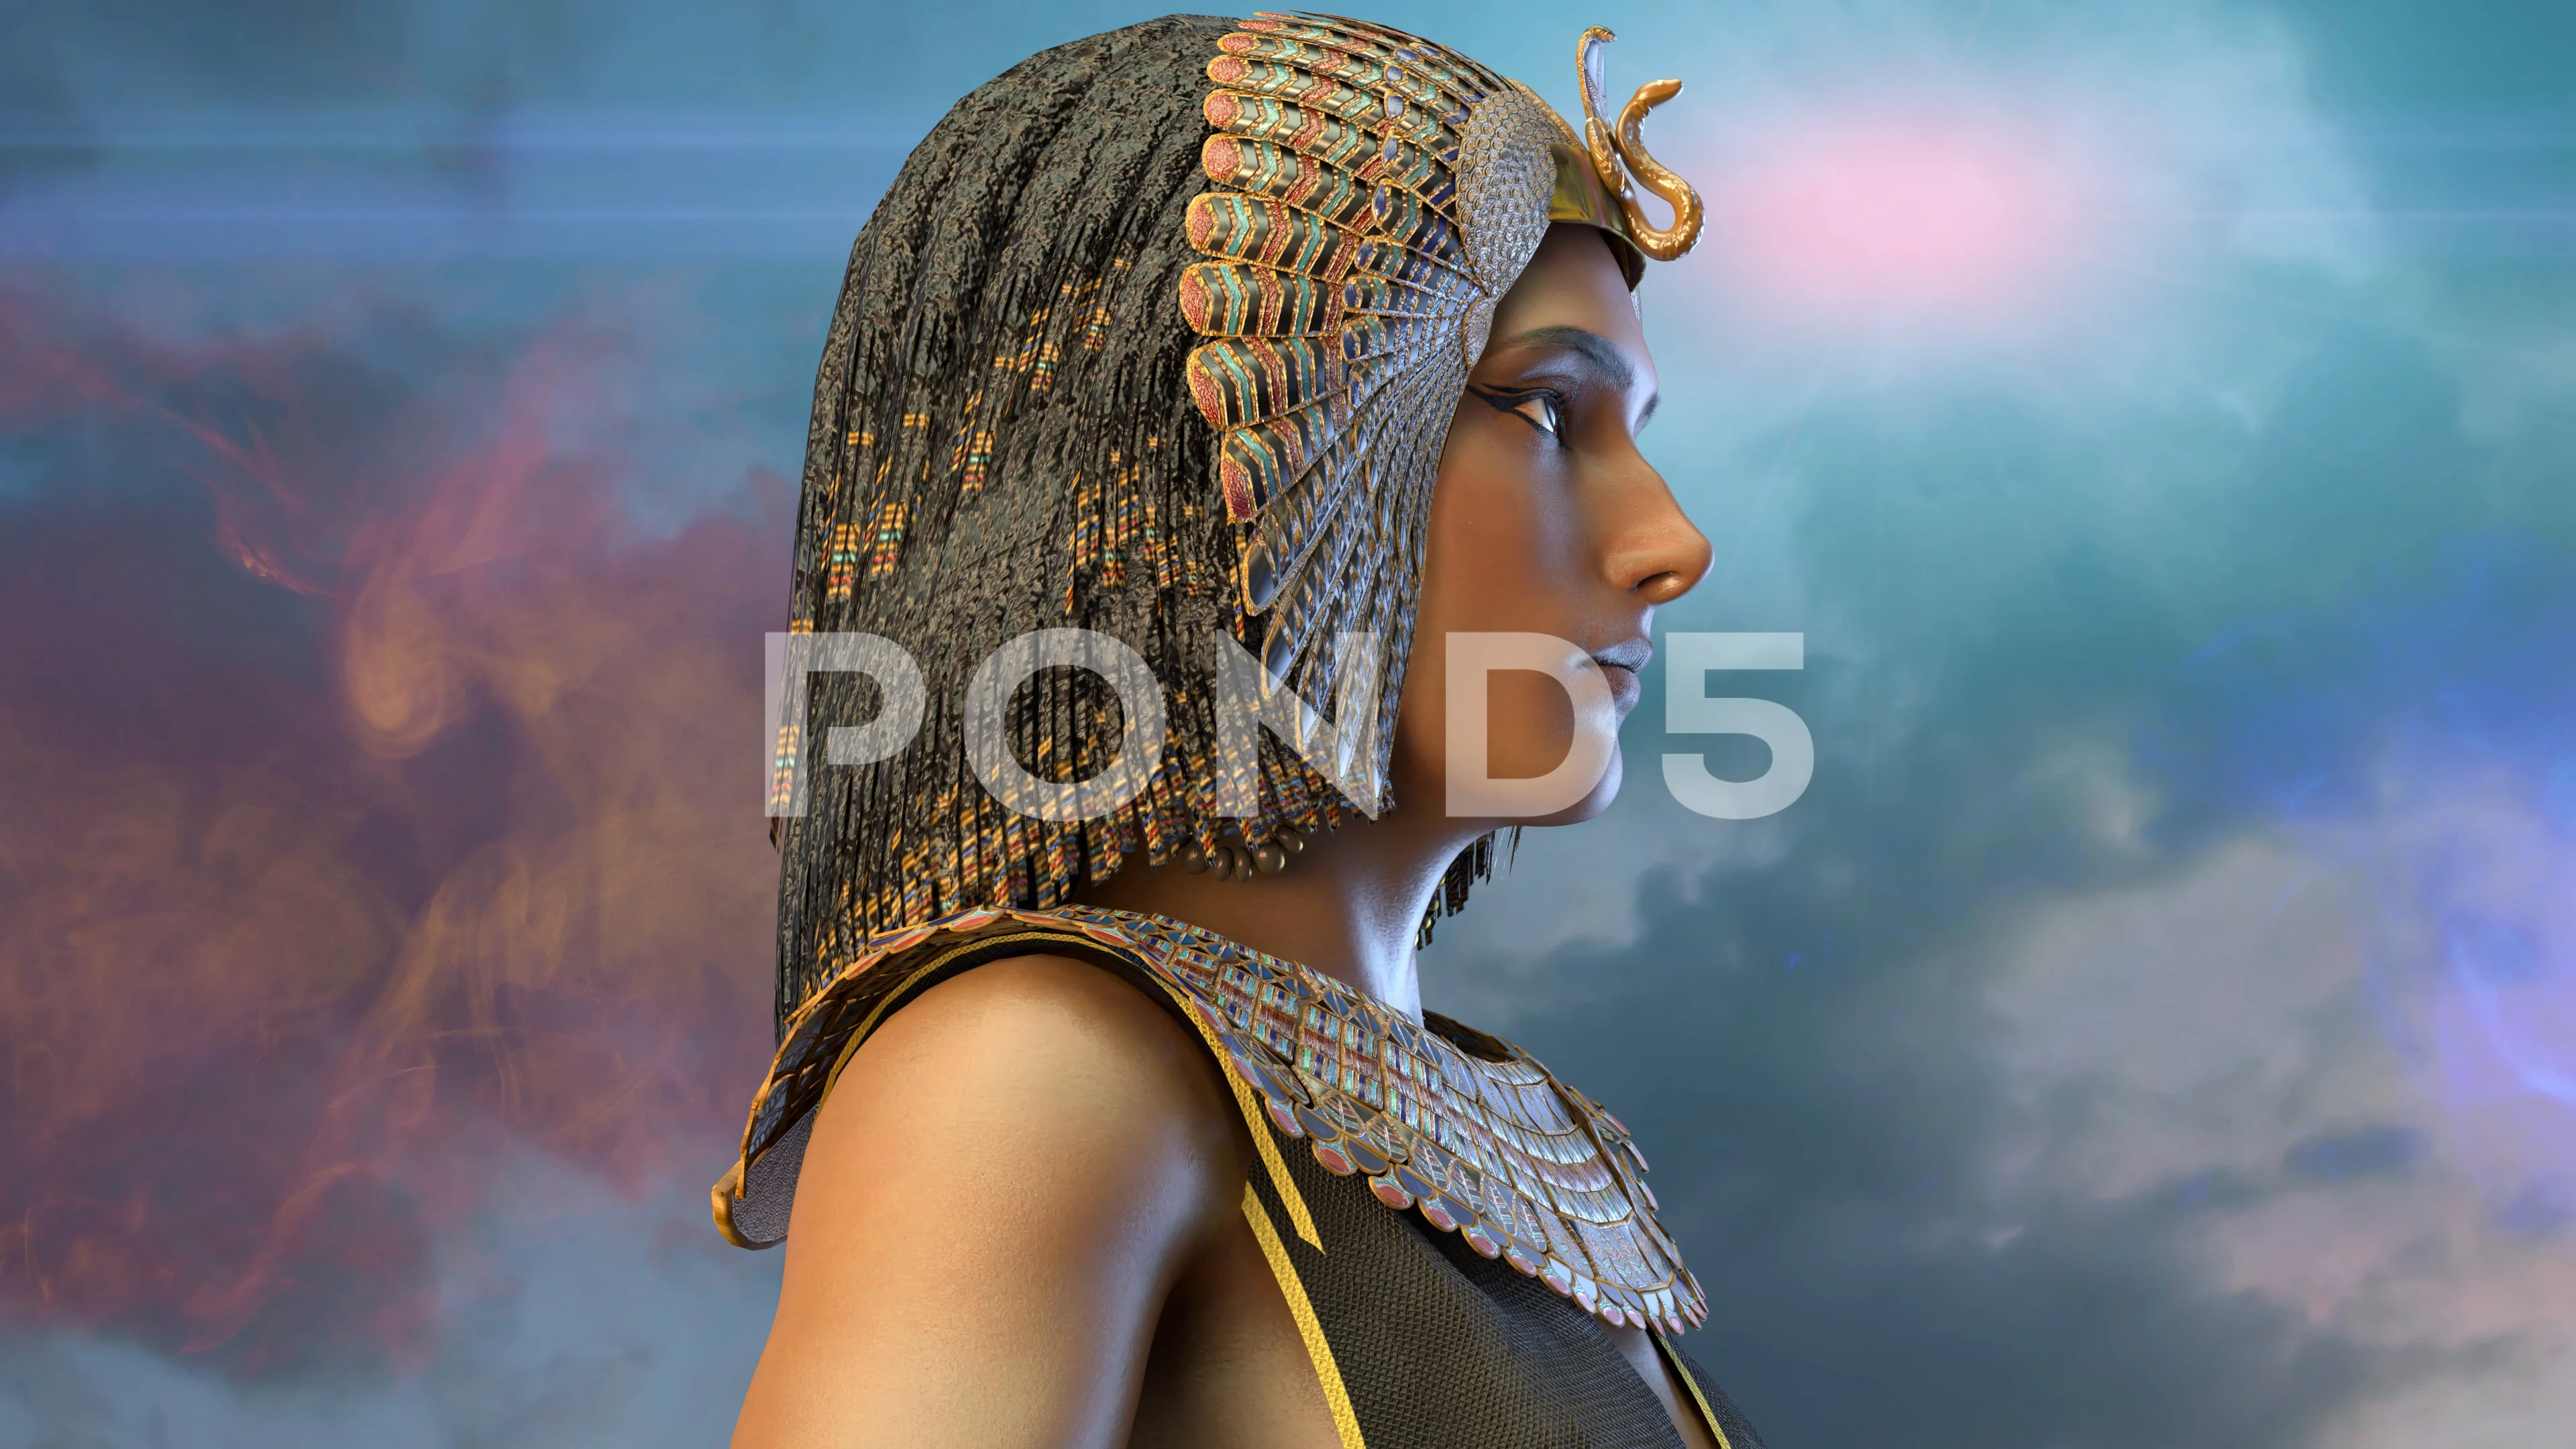 Cleopatra Egyptian Queen VII century of ... | Stock Video | Pond5